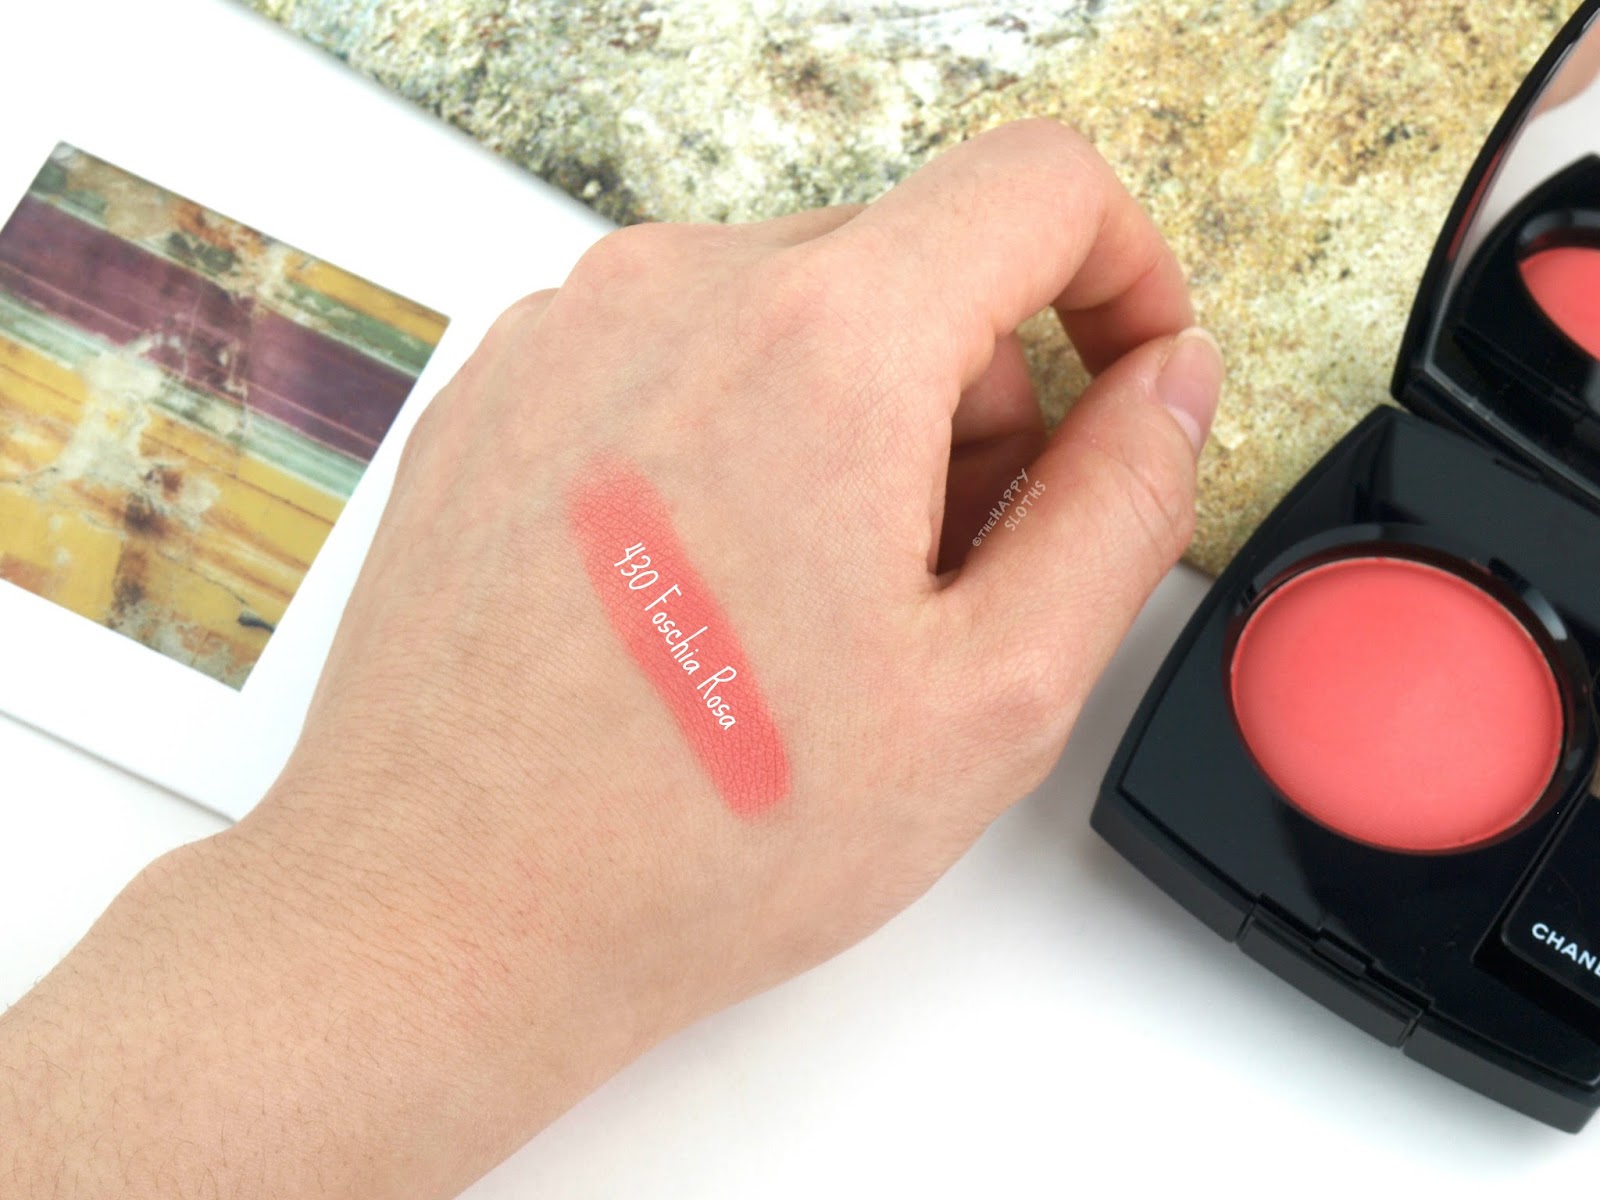 Chanel Spring/Summer 2018 | Joues Contraste Powder Blush in "430 Foschia Rose": Review and Swatches